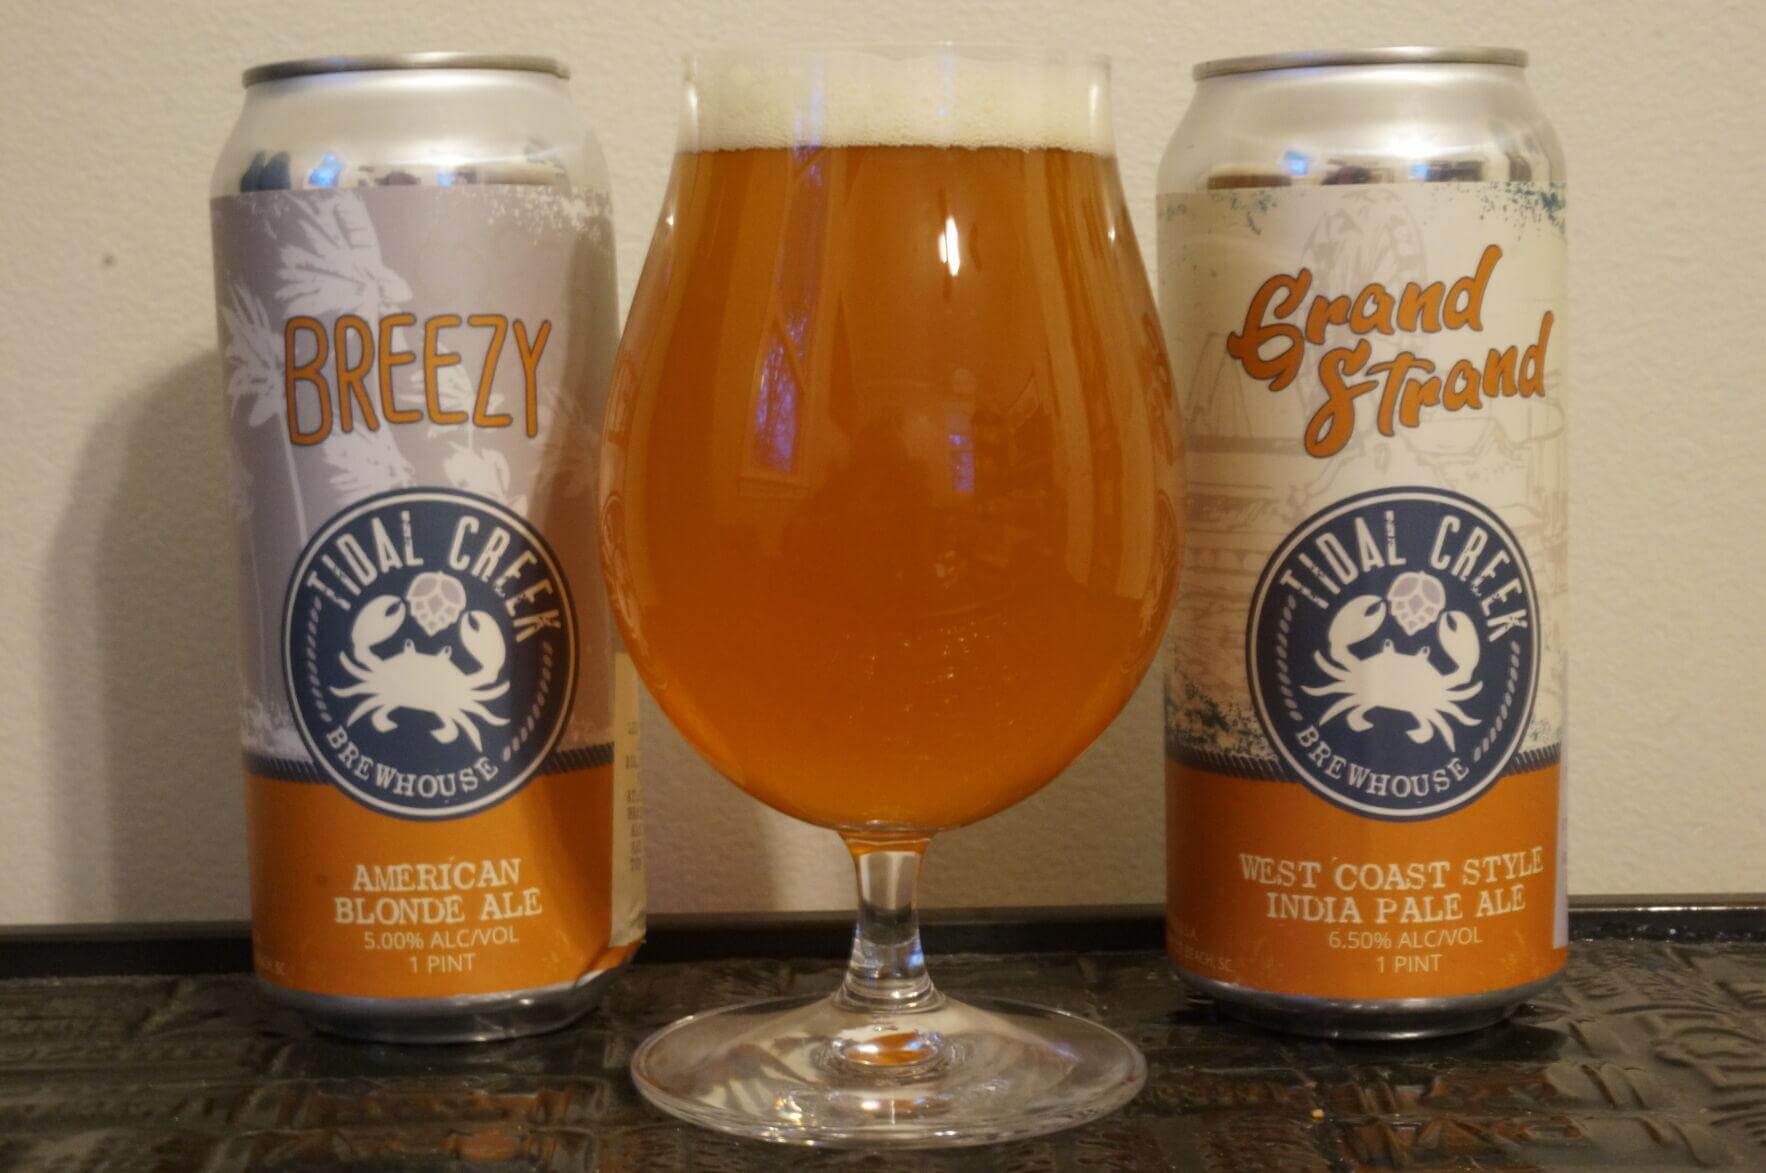 tidal creek west coast style ipa and american blonde ale beer cans